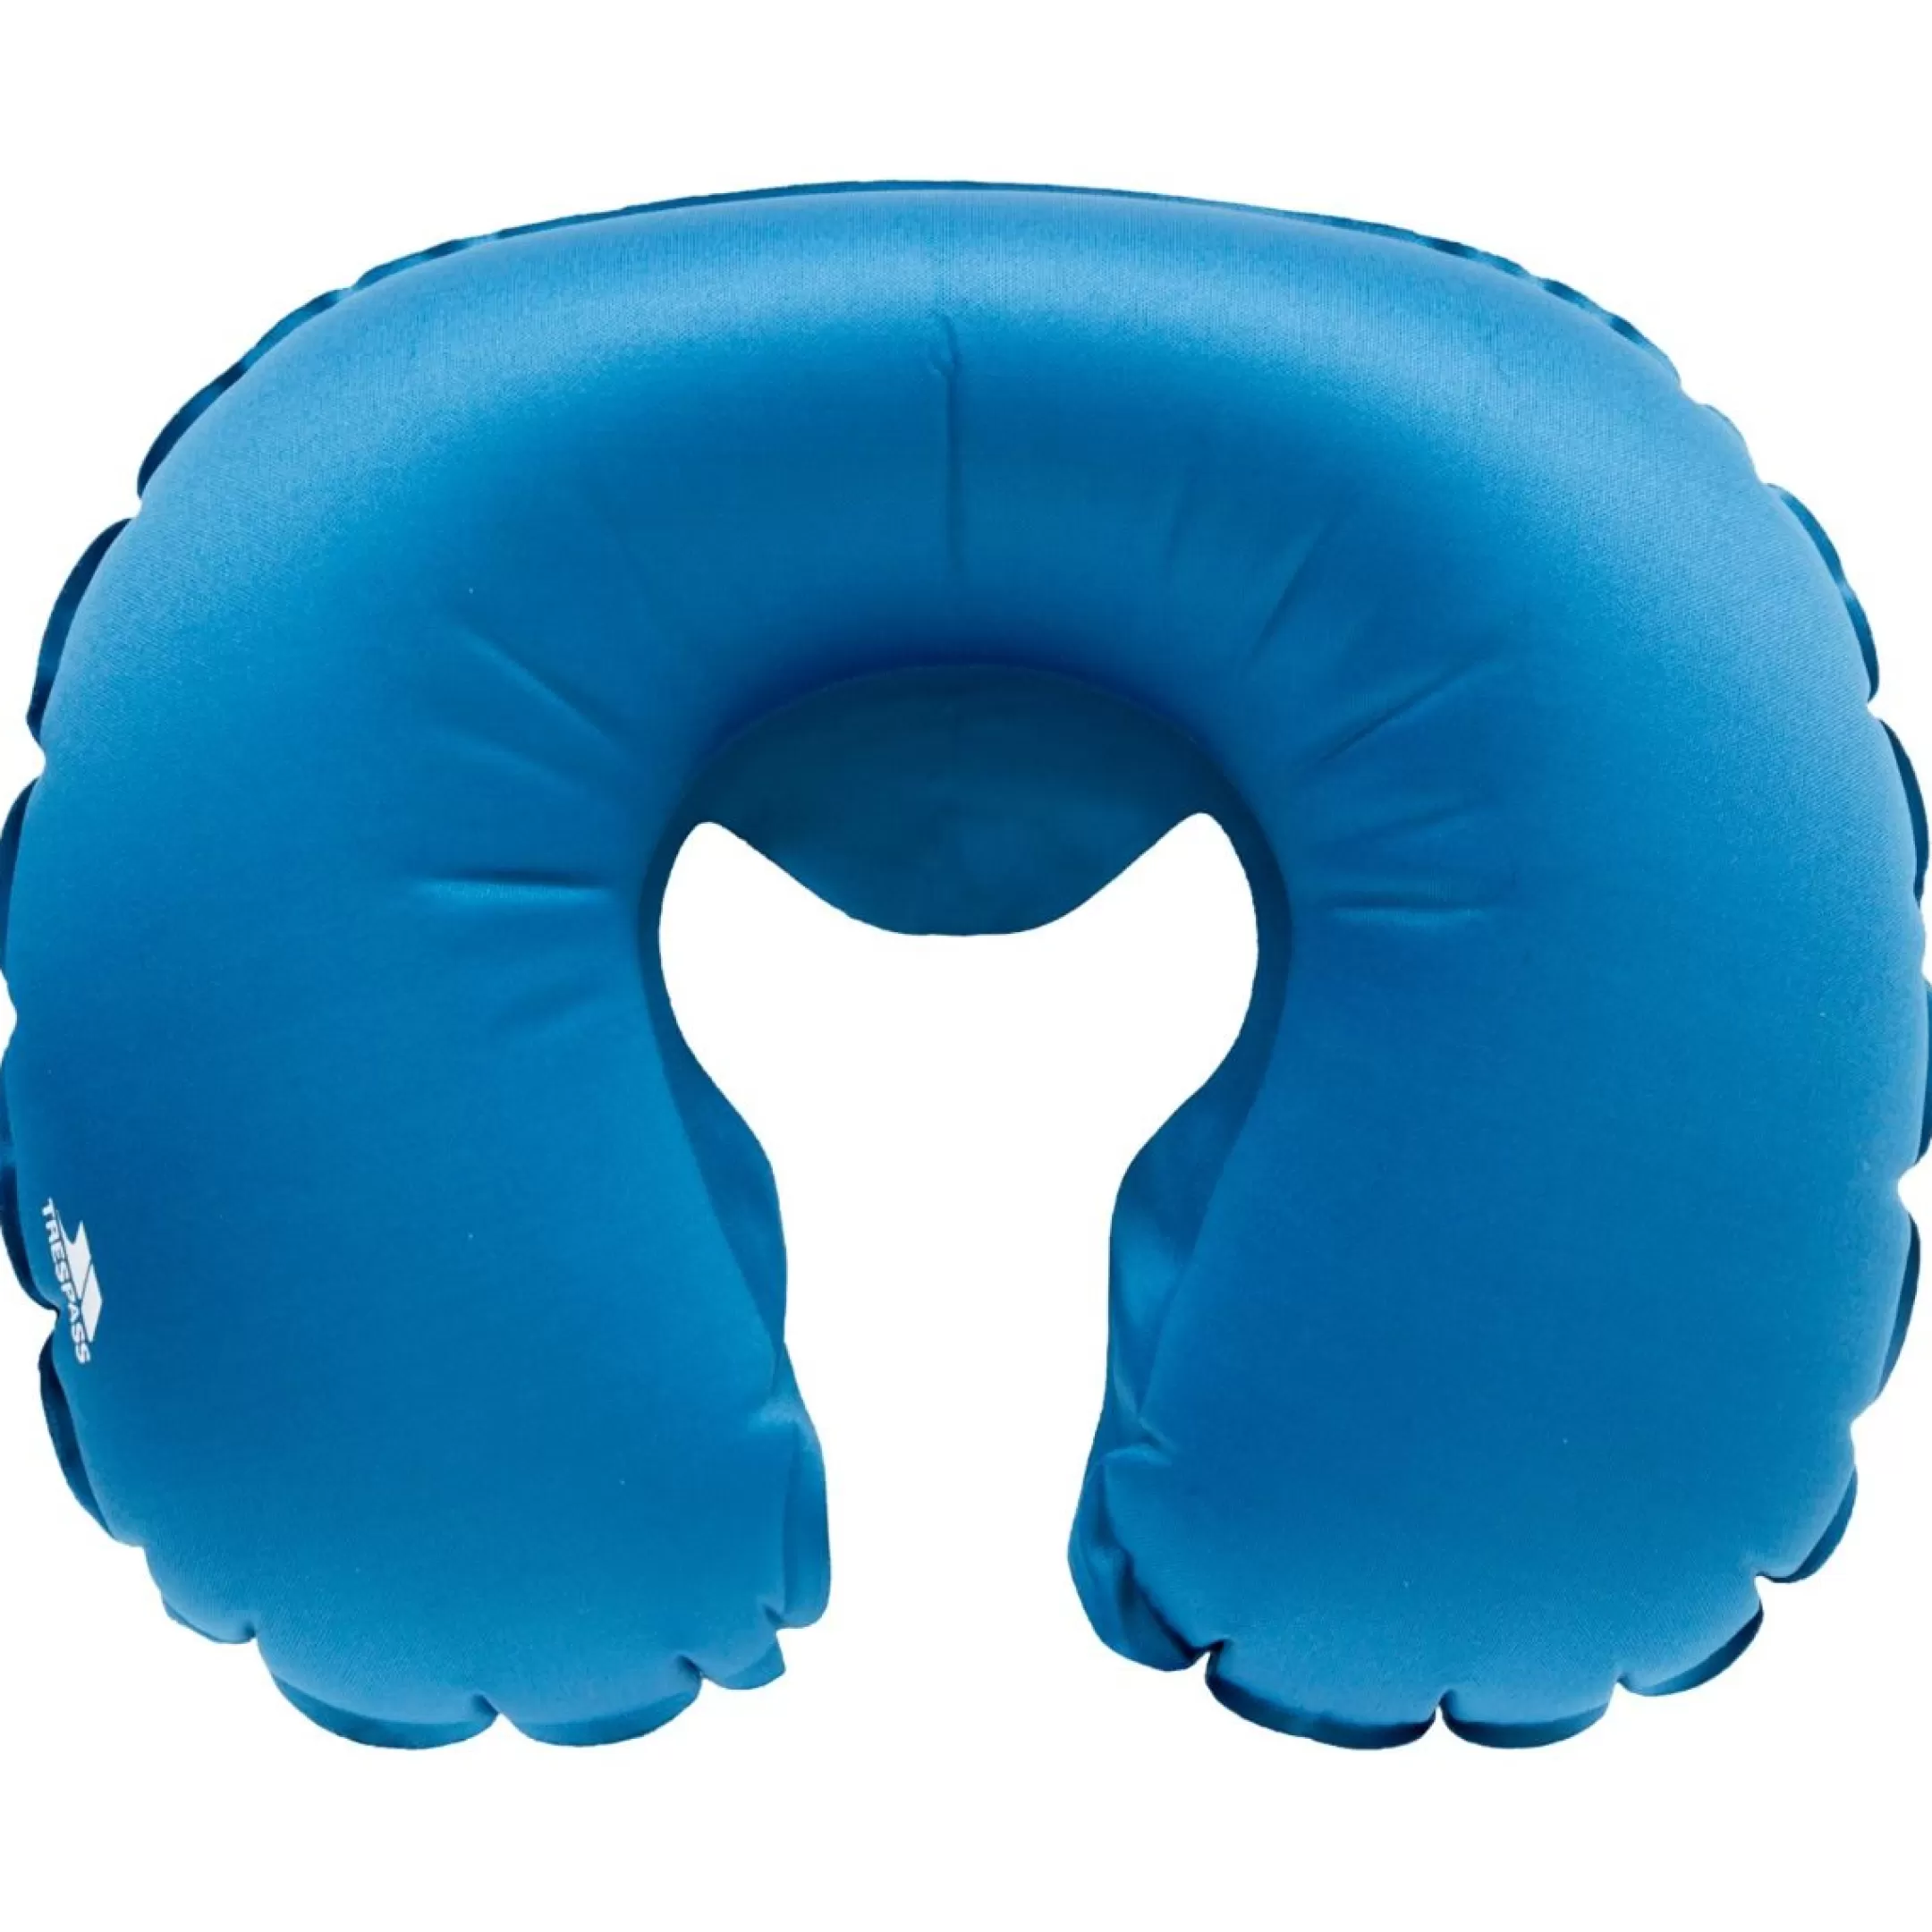 Inflatable Travel Pillow in Inflight | Trespass Hot